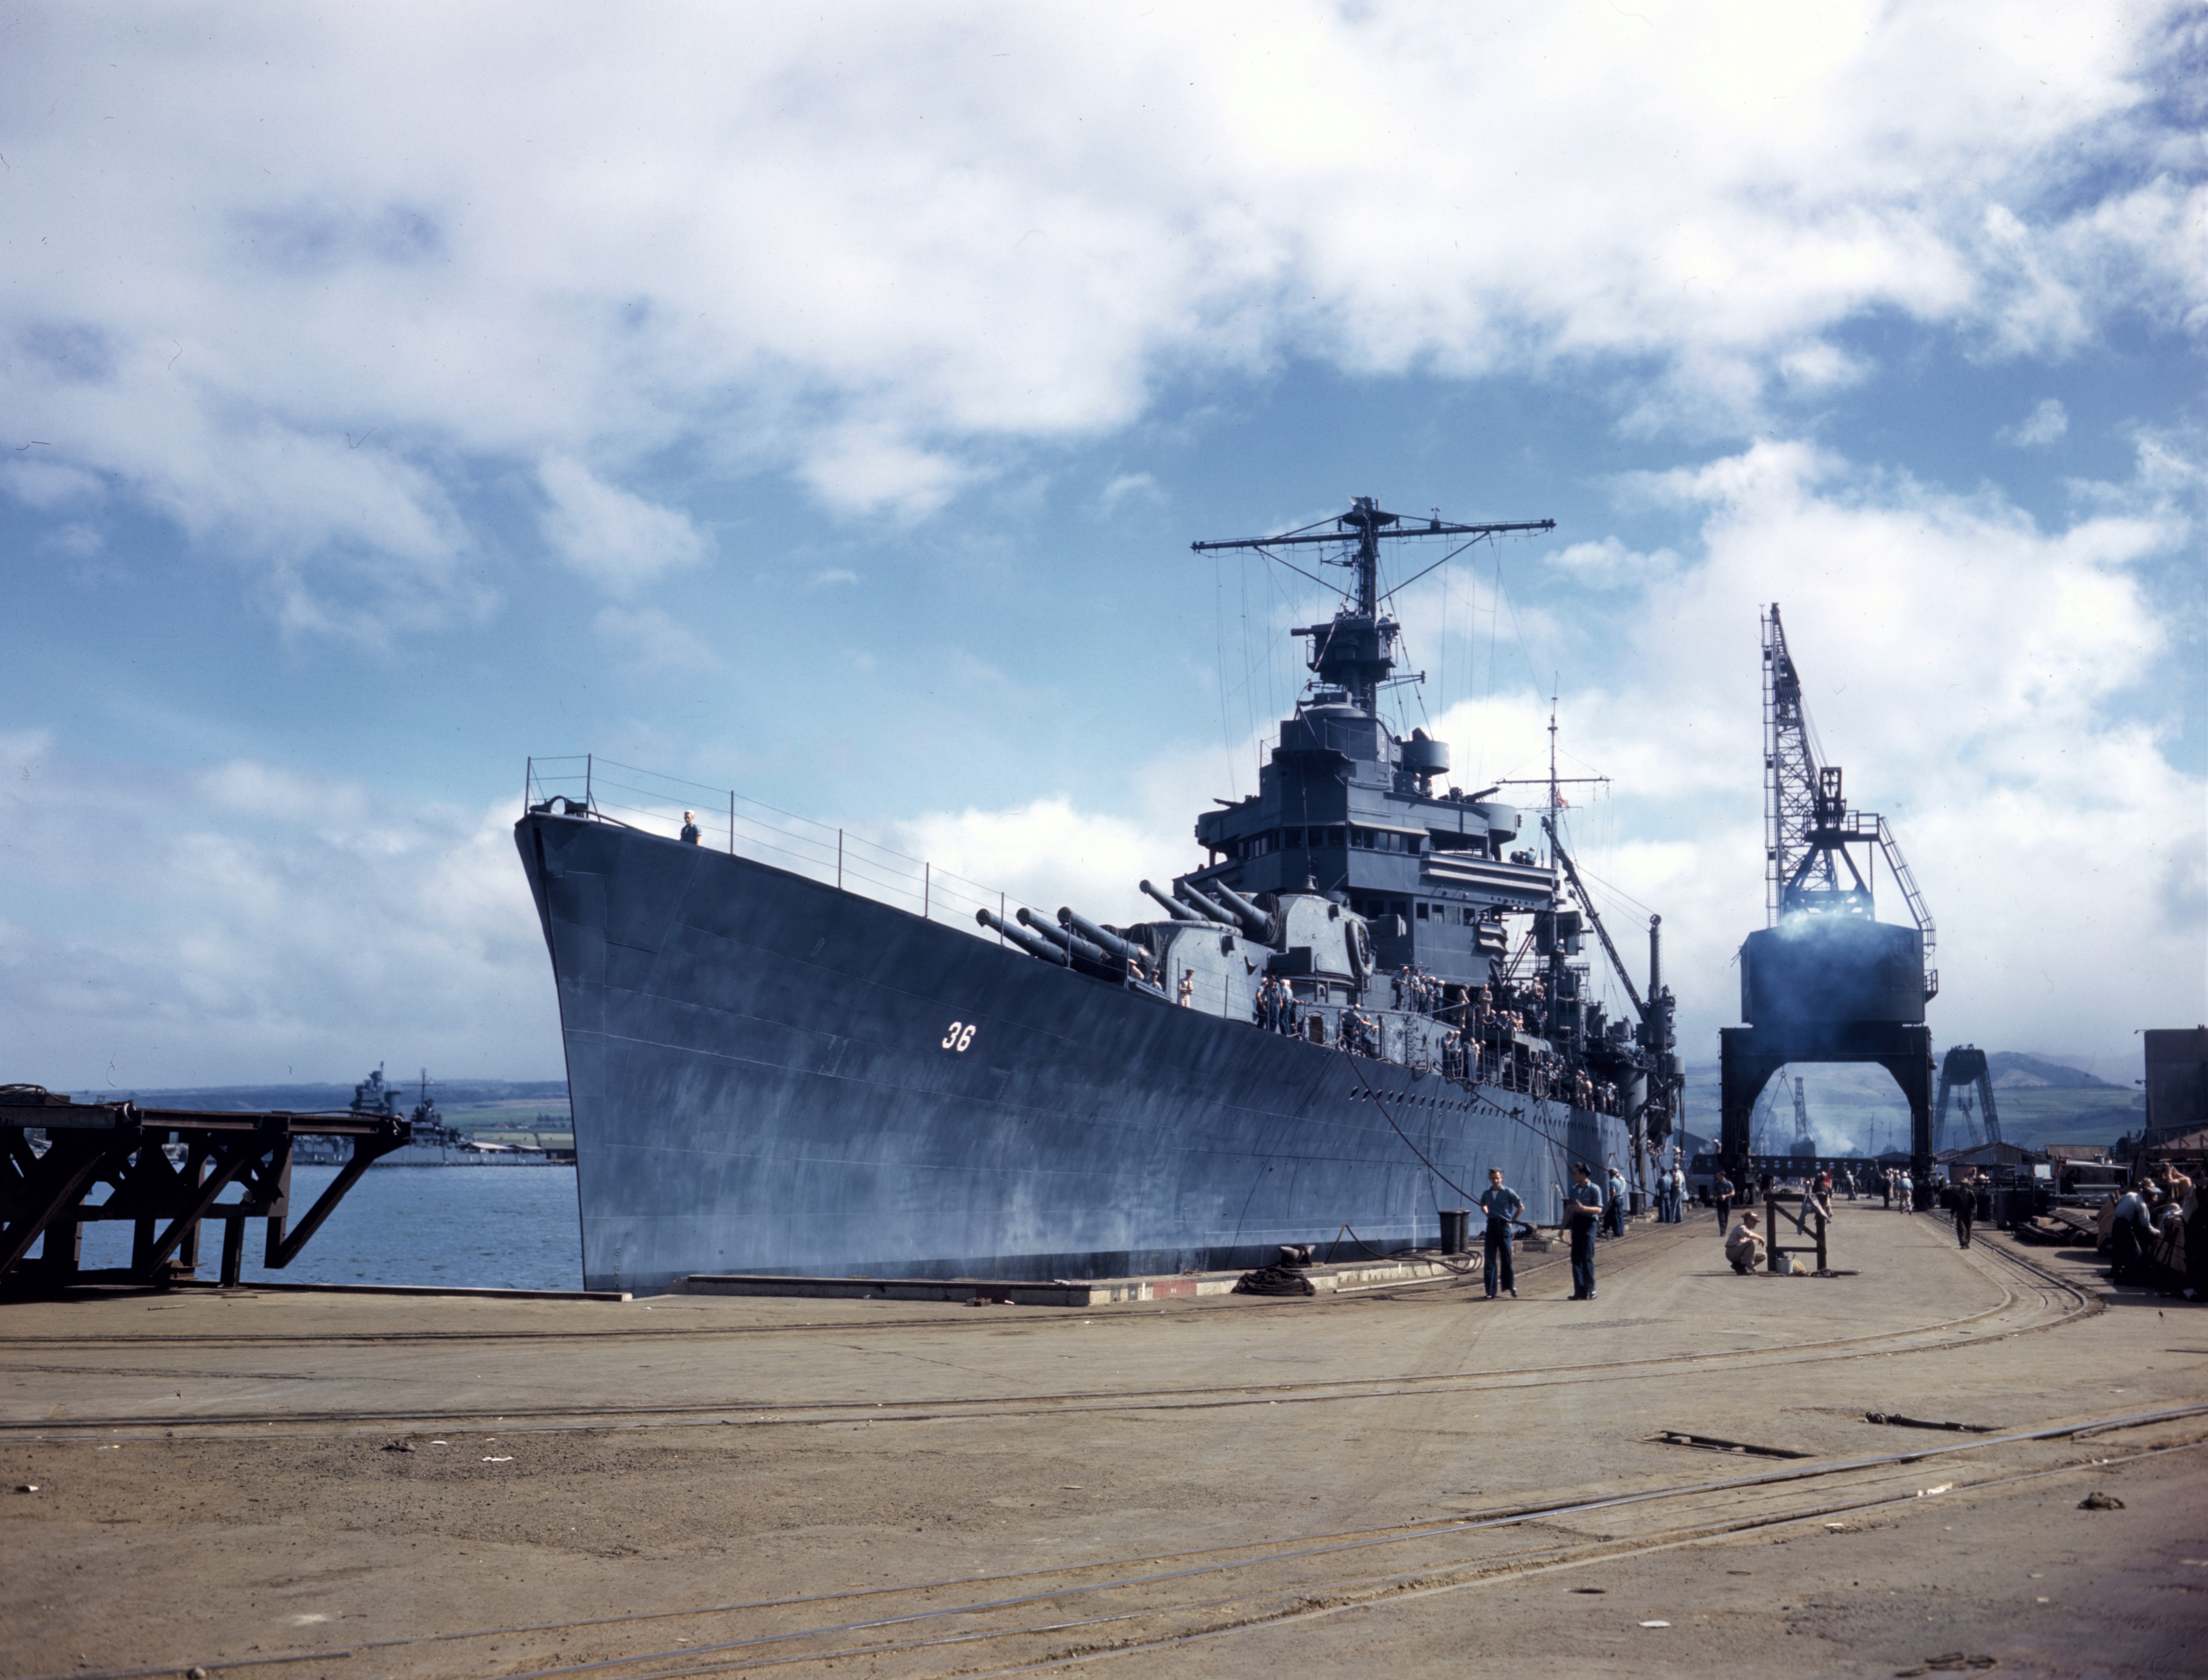 USS Minneapolis at Pearl Harbor, US Territory of Hawaii after being fitted with a new bow, 11 Apr 1943, photo 1 of 2